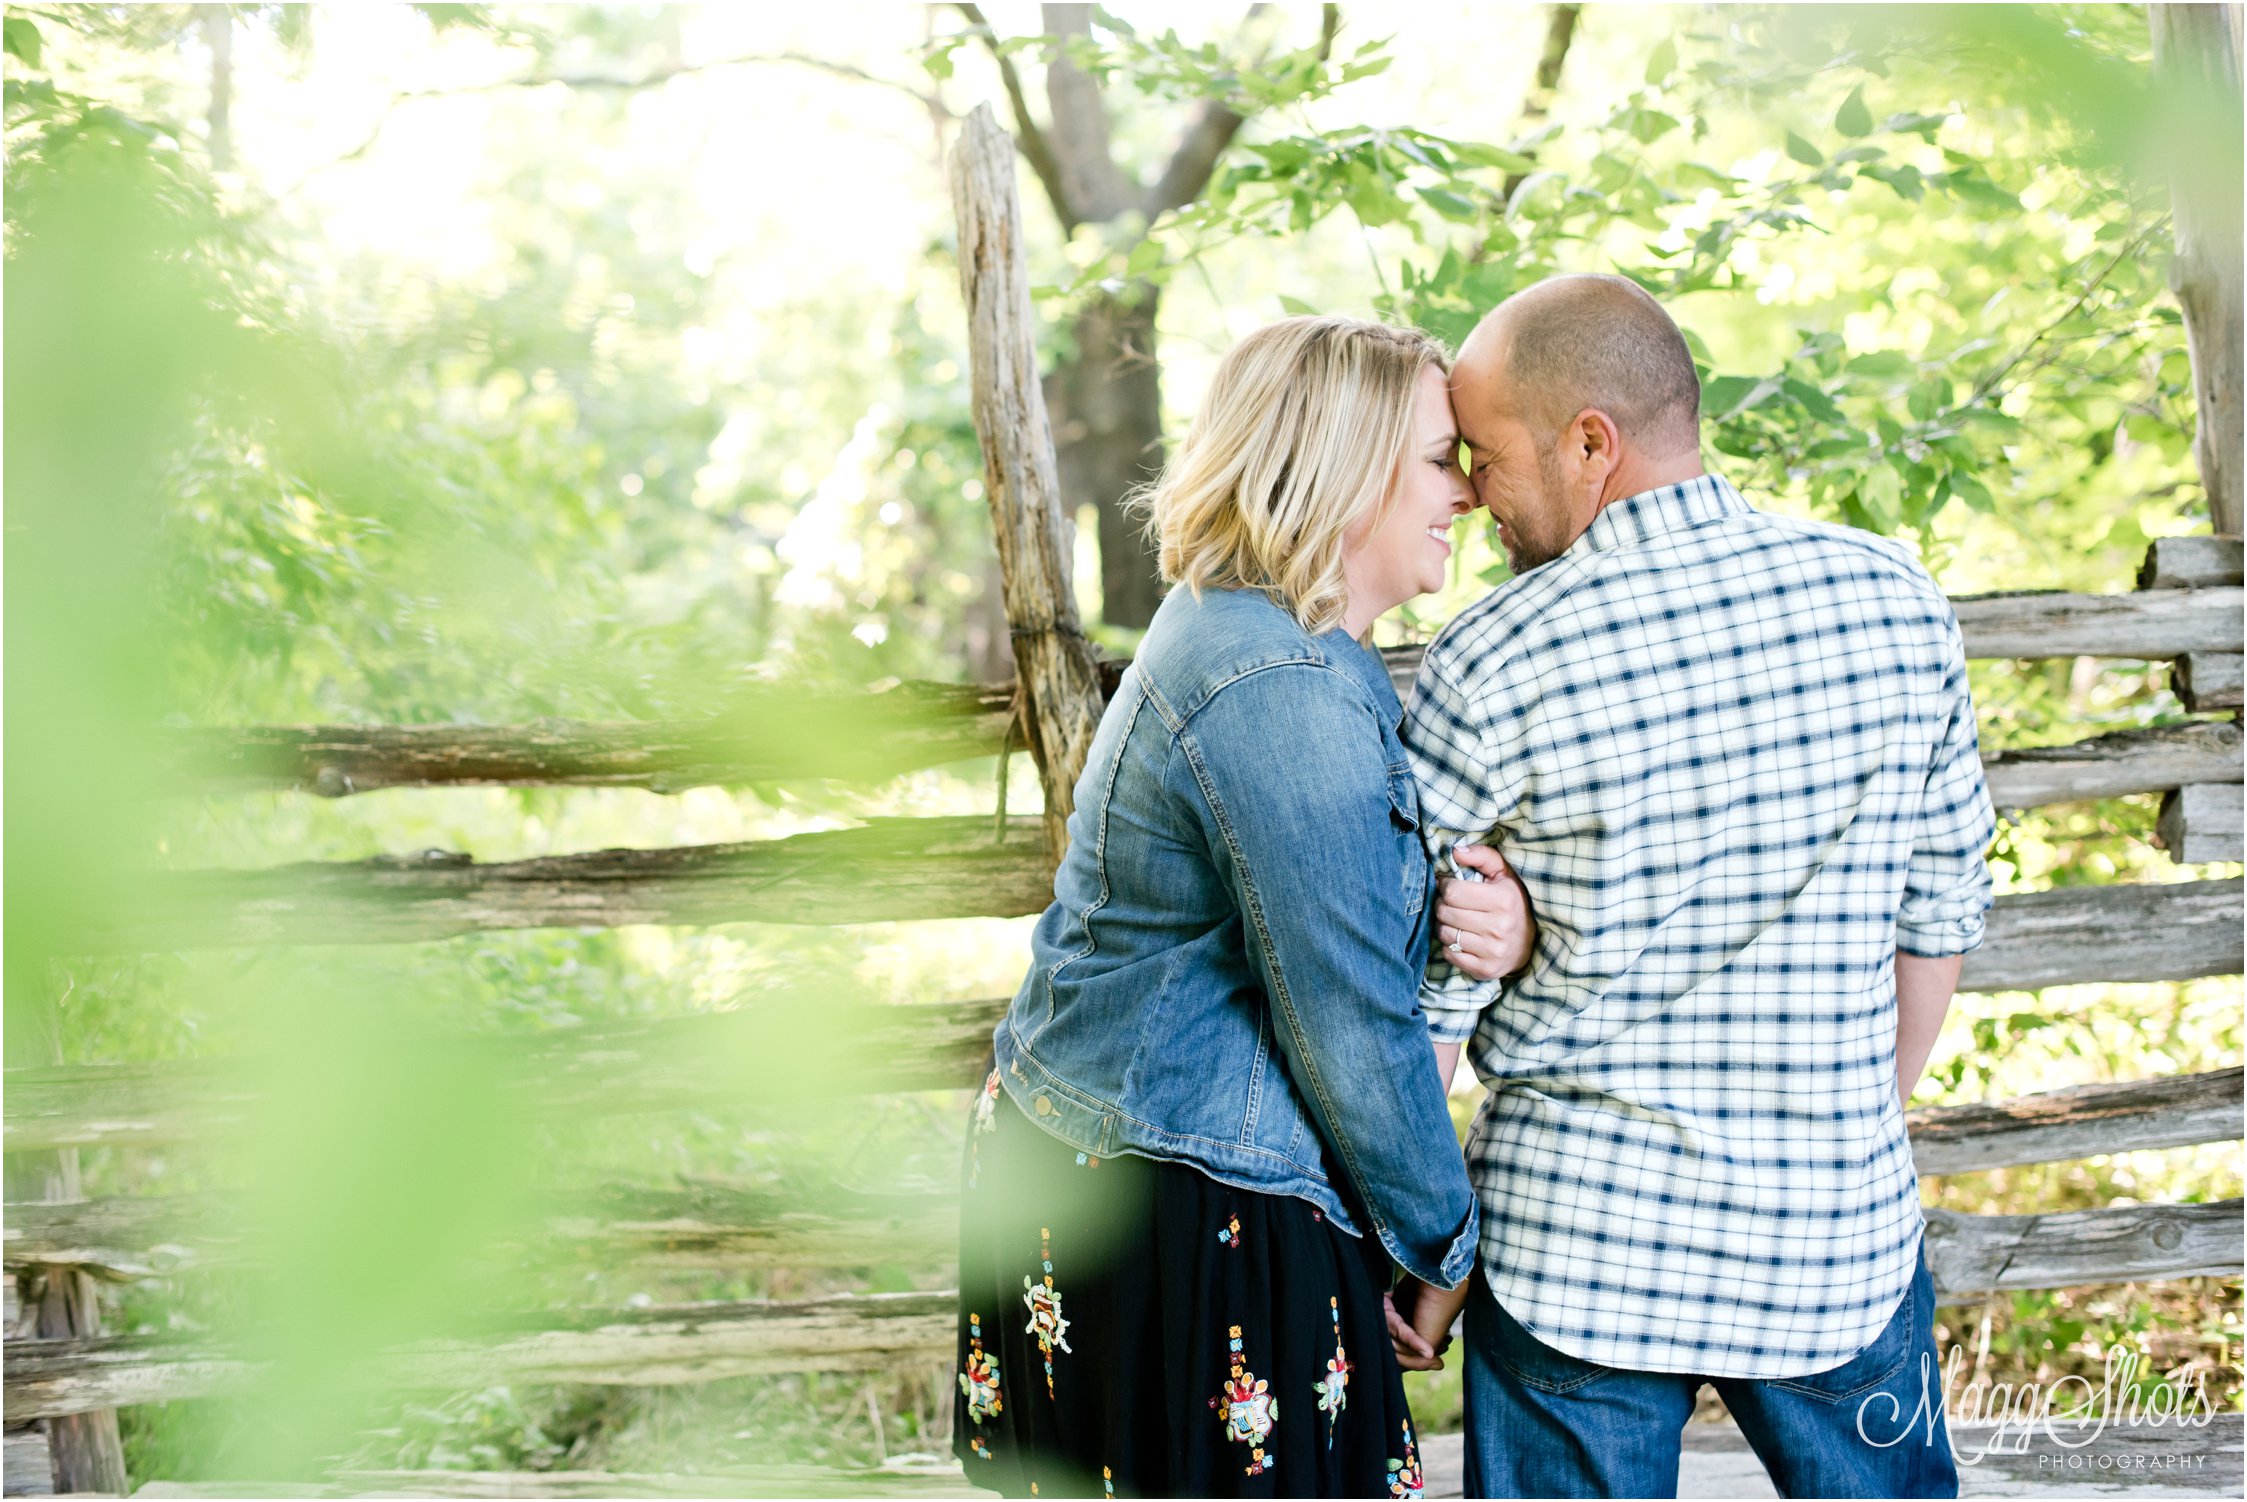 MaggShots Photography, MaggShots, Professional Photography, Professional Photographer, Engagement Session, Cedar Hill State Park